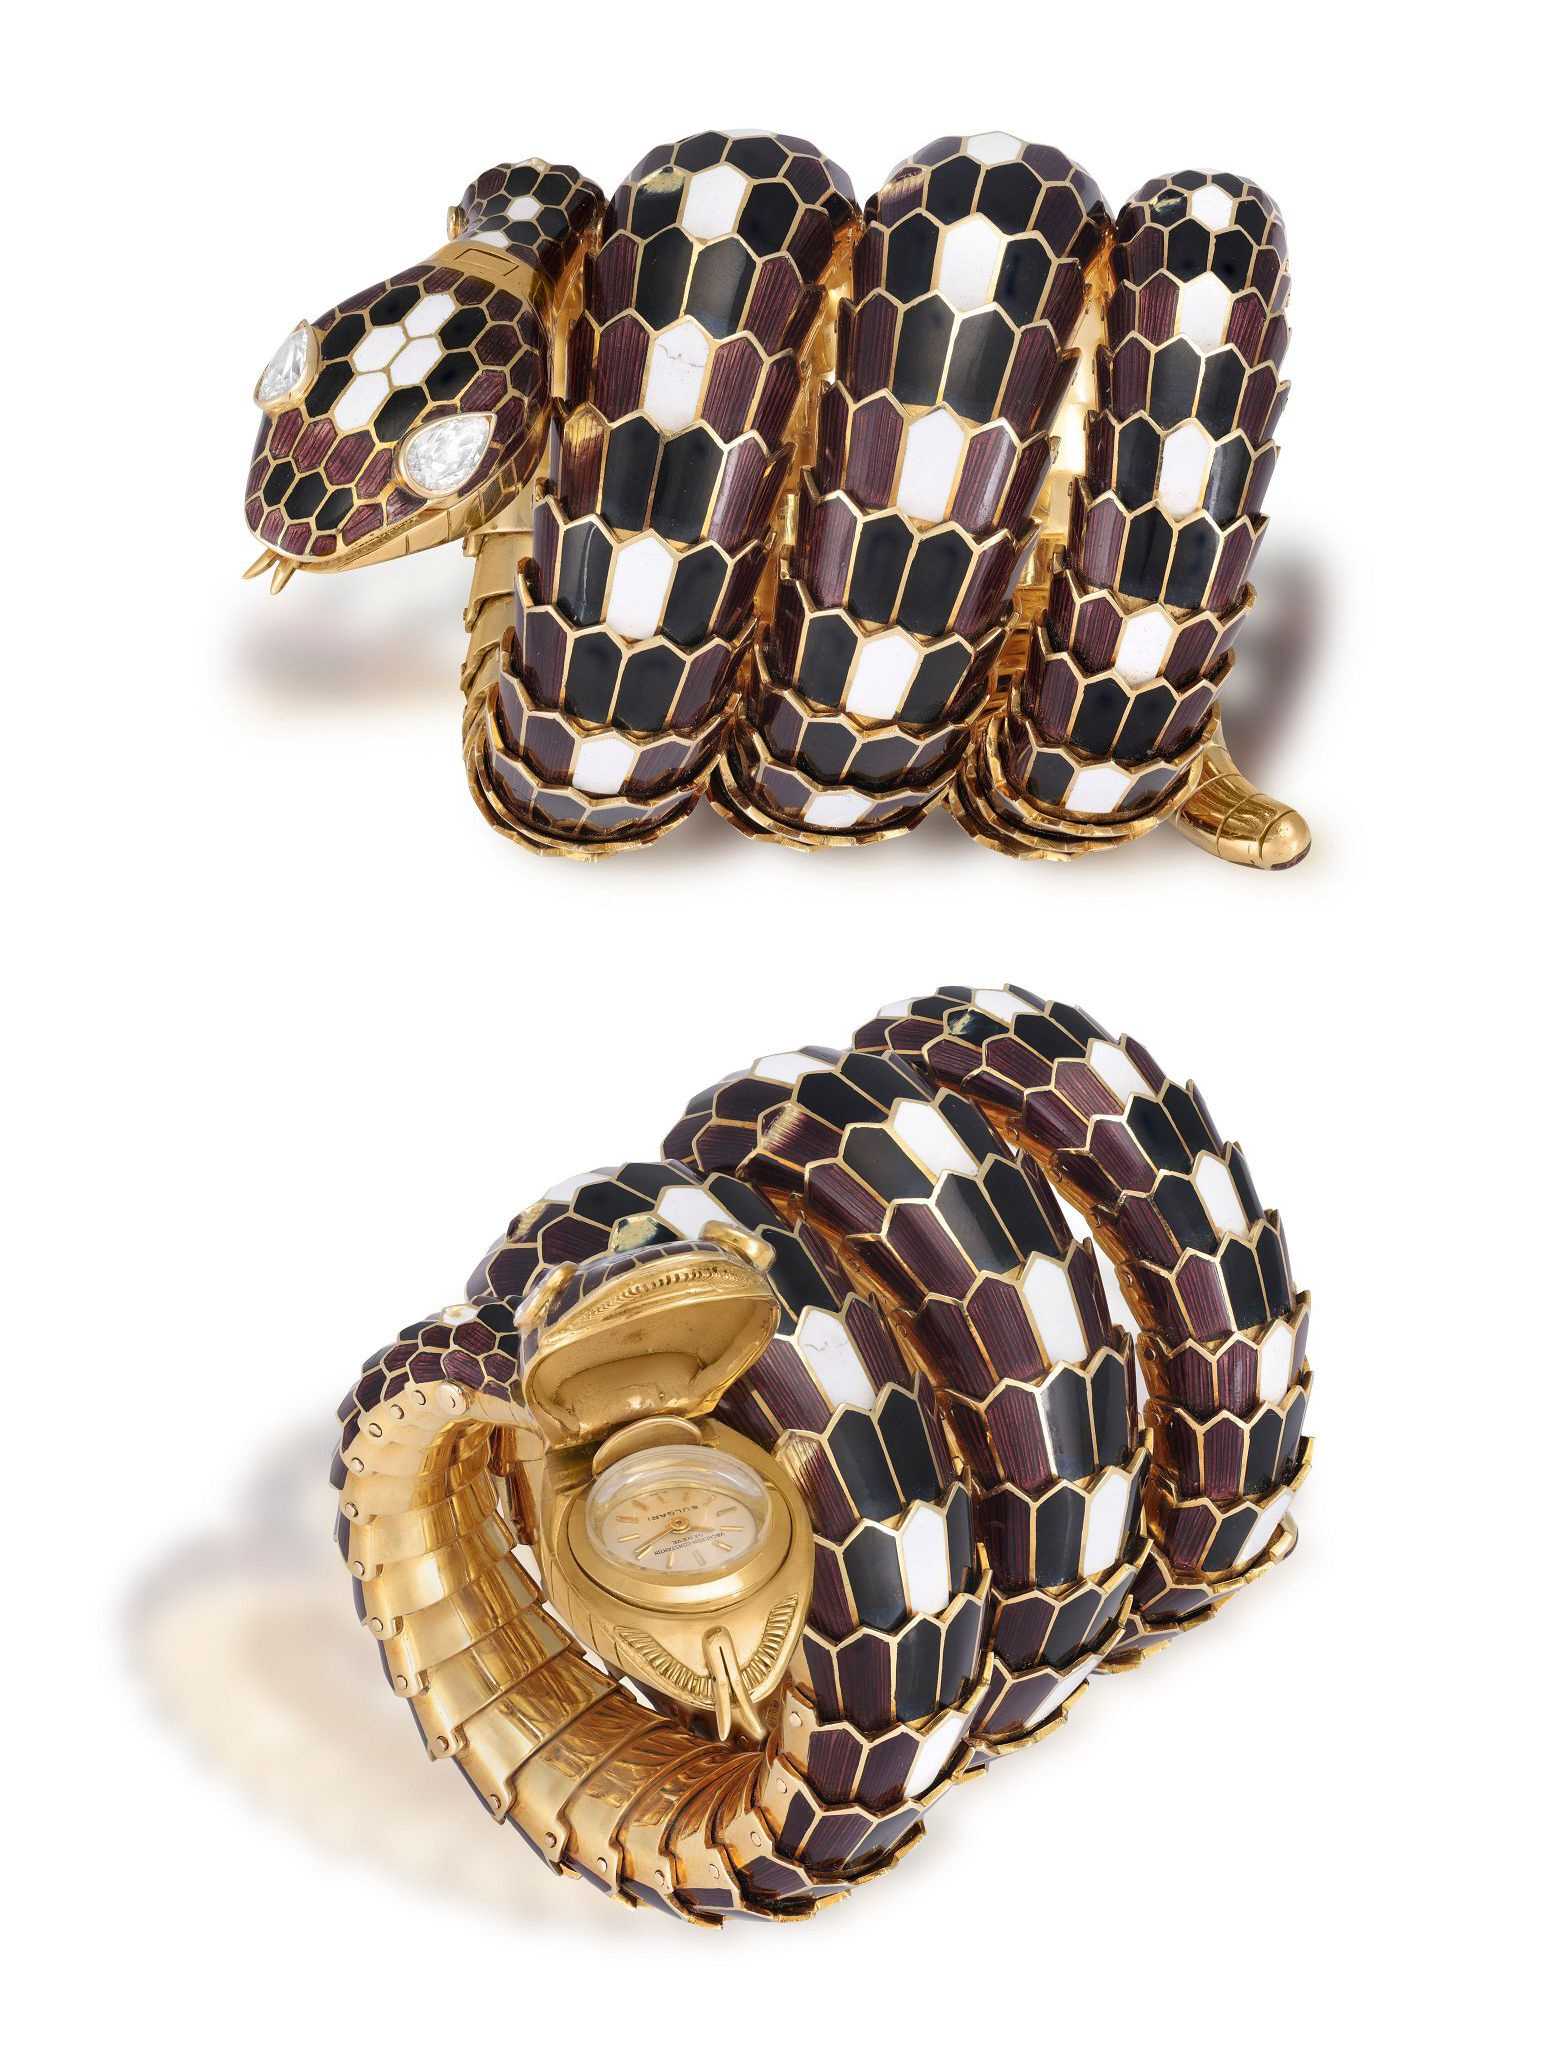 Circa-1960 Serpenti bracelet watch by the Italian jeweler Bulgari, estimated at €40,000-€60,000 ($42,730-$64,100) at Adam’s Auctioneers on May 14.